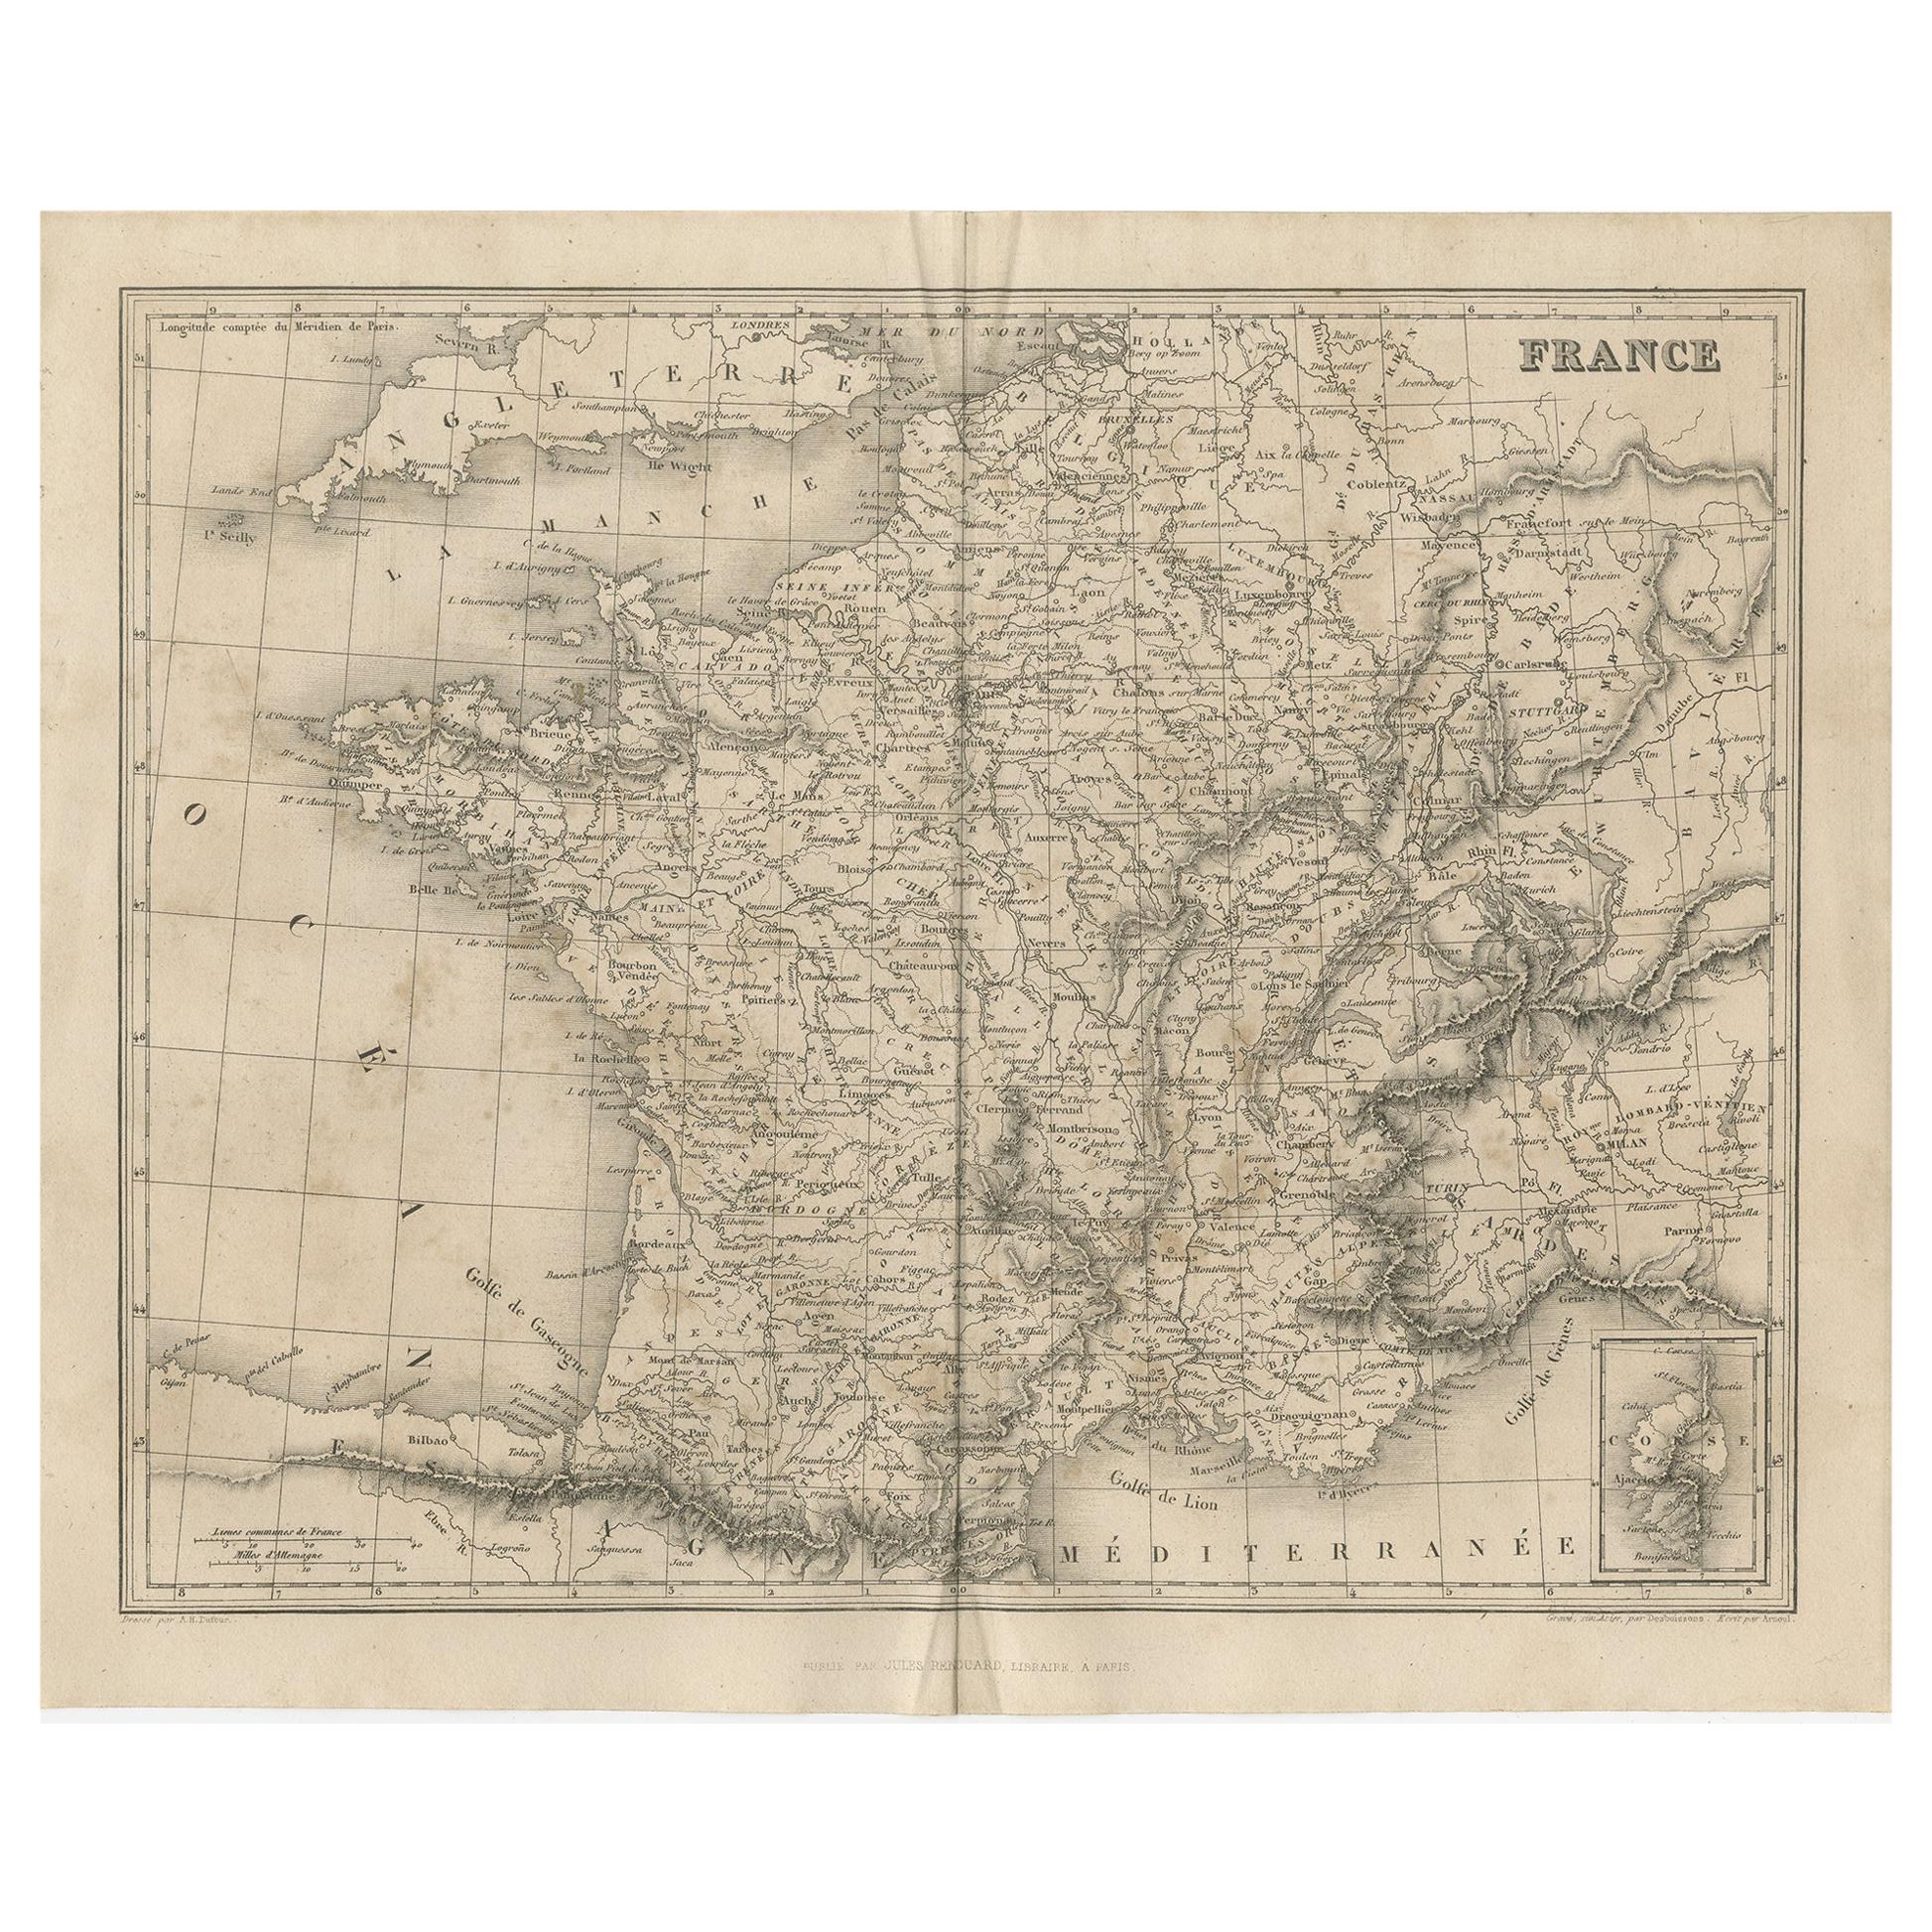 Antique Map of France by Balbi '1847'